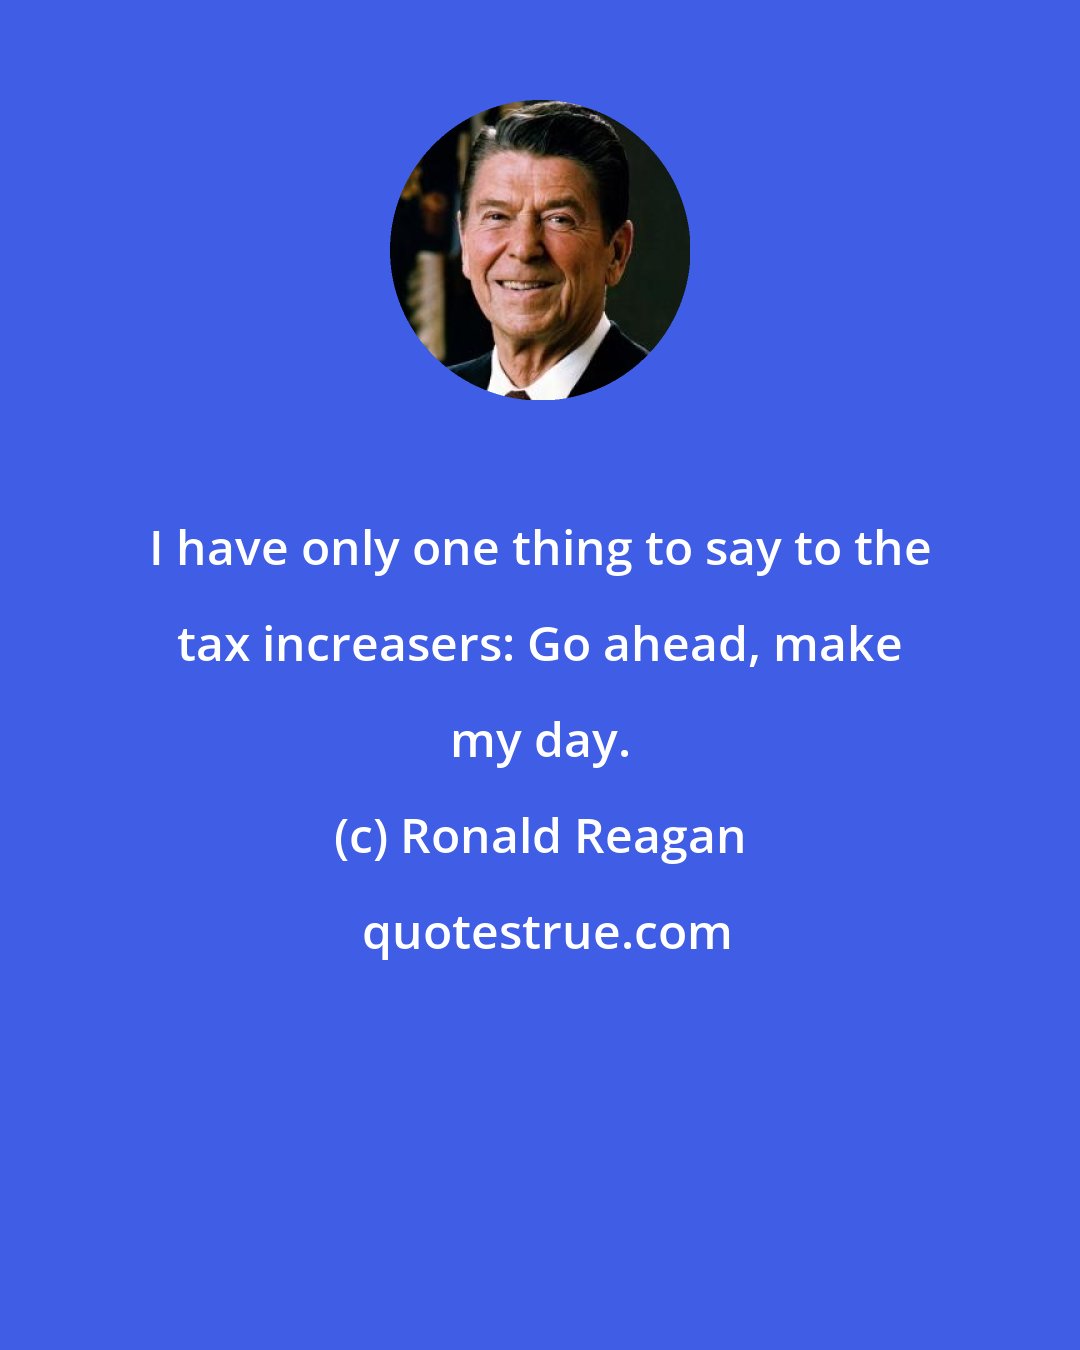 Ronald Reagan: I have only one thing to say to the tax increasers: Go ahead, make my day.